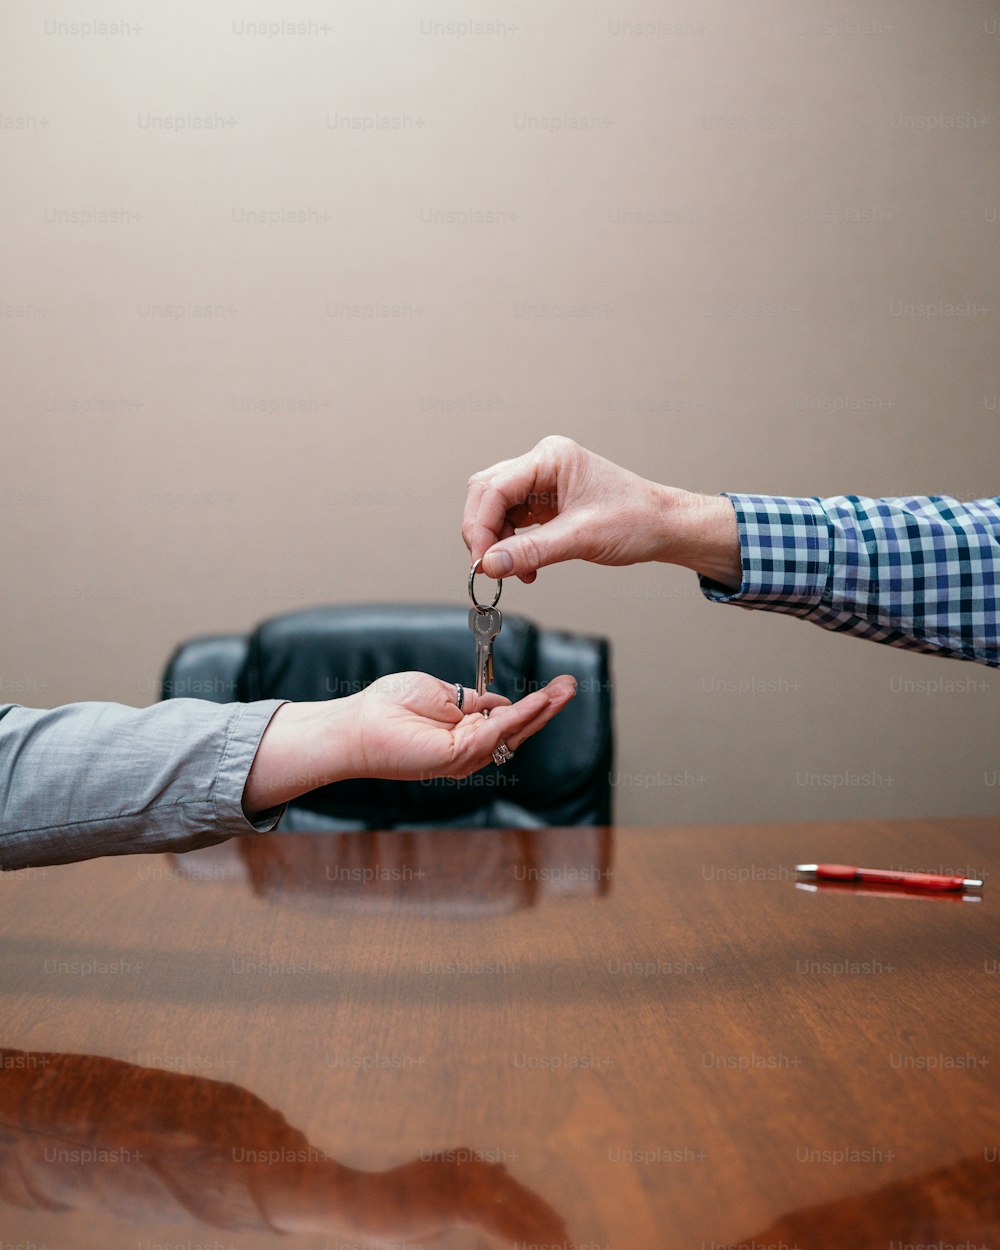 a person handing another person a key on a table